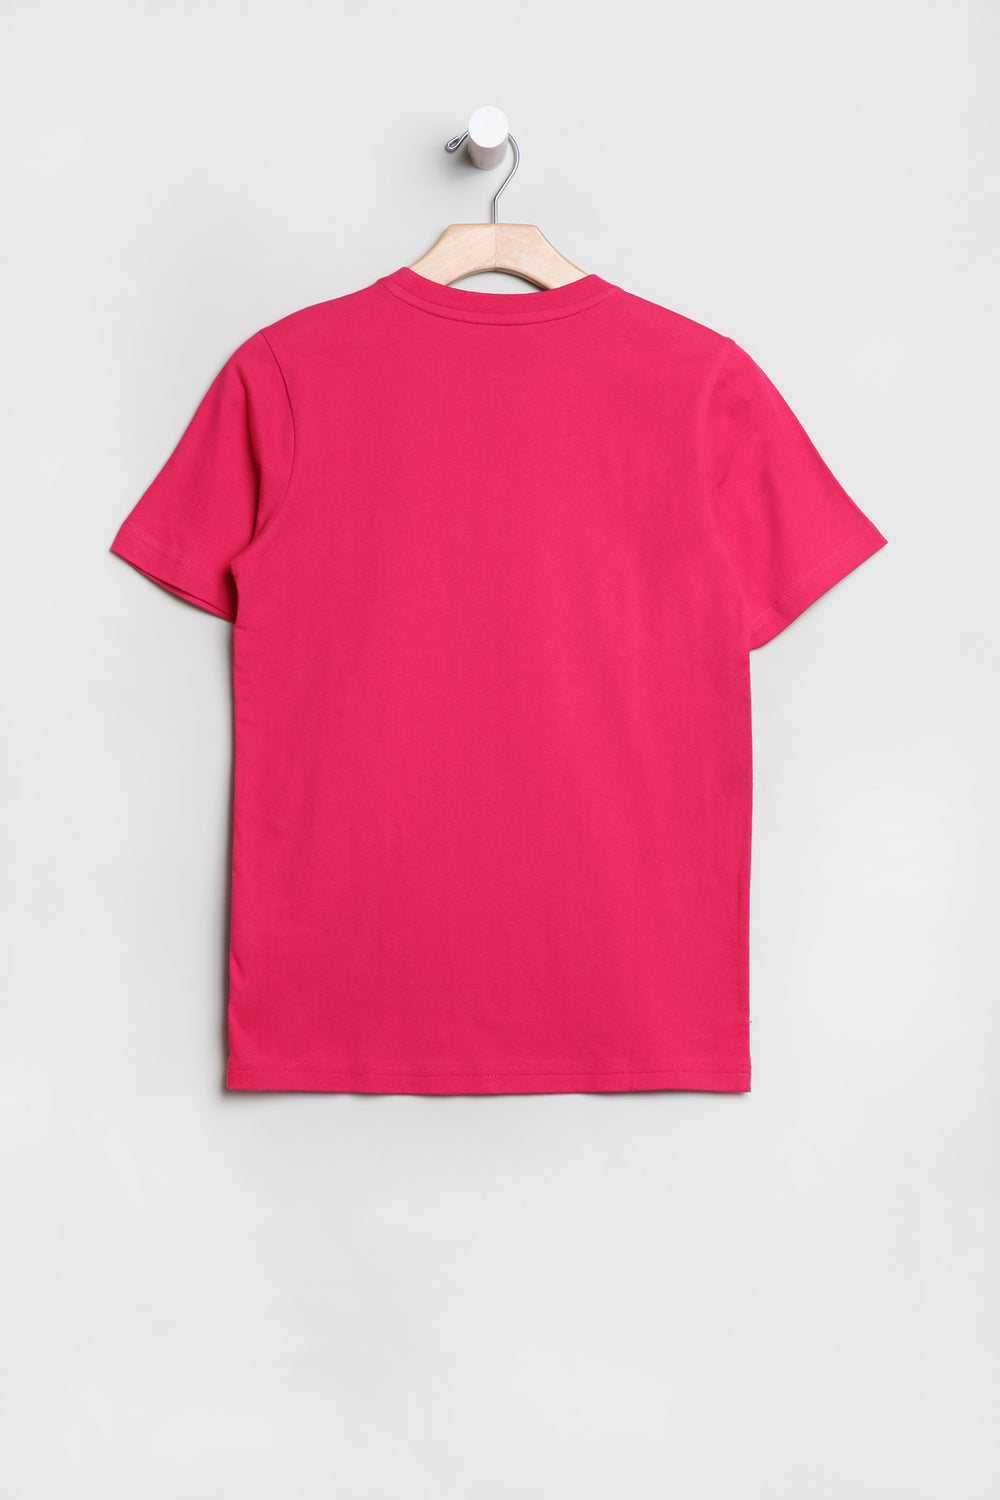 West49 Youth Flame Logo T-Shirt Magenta